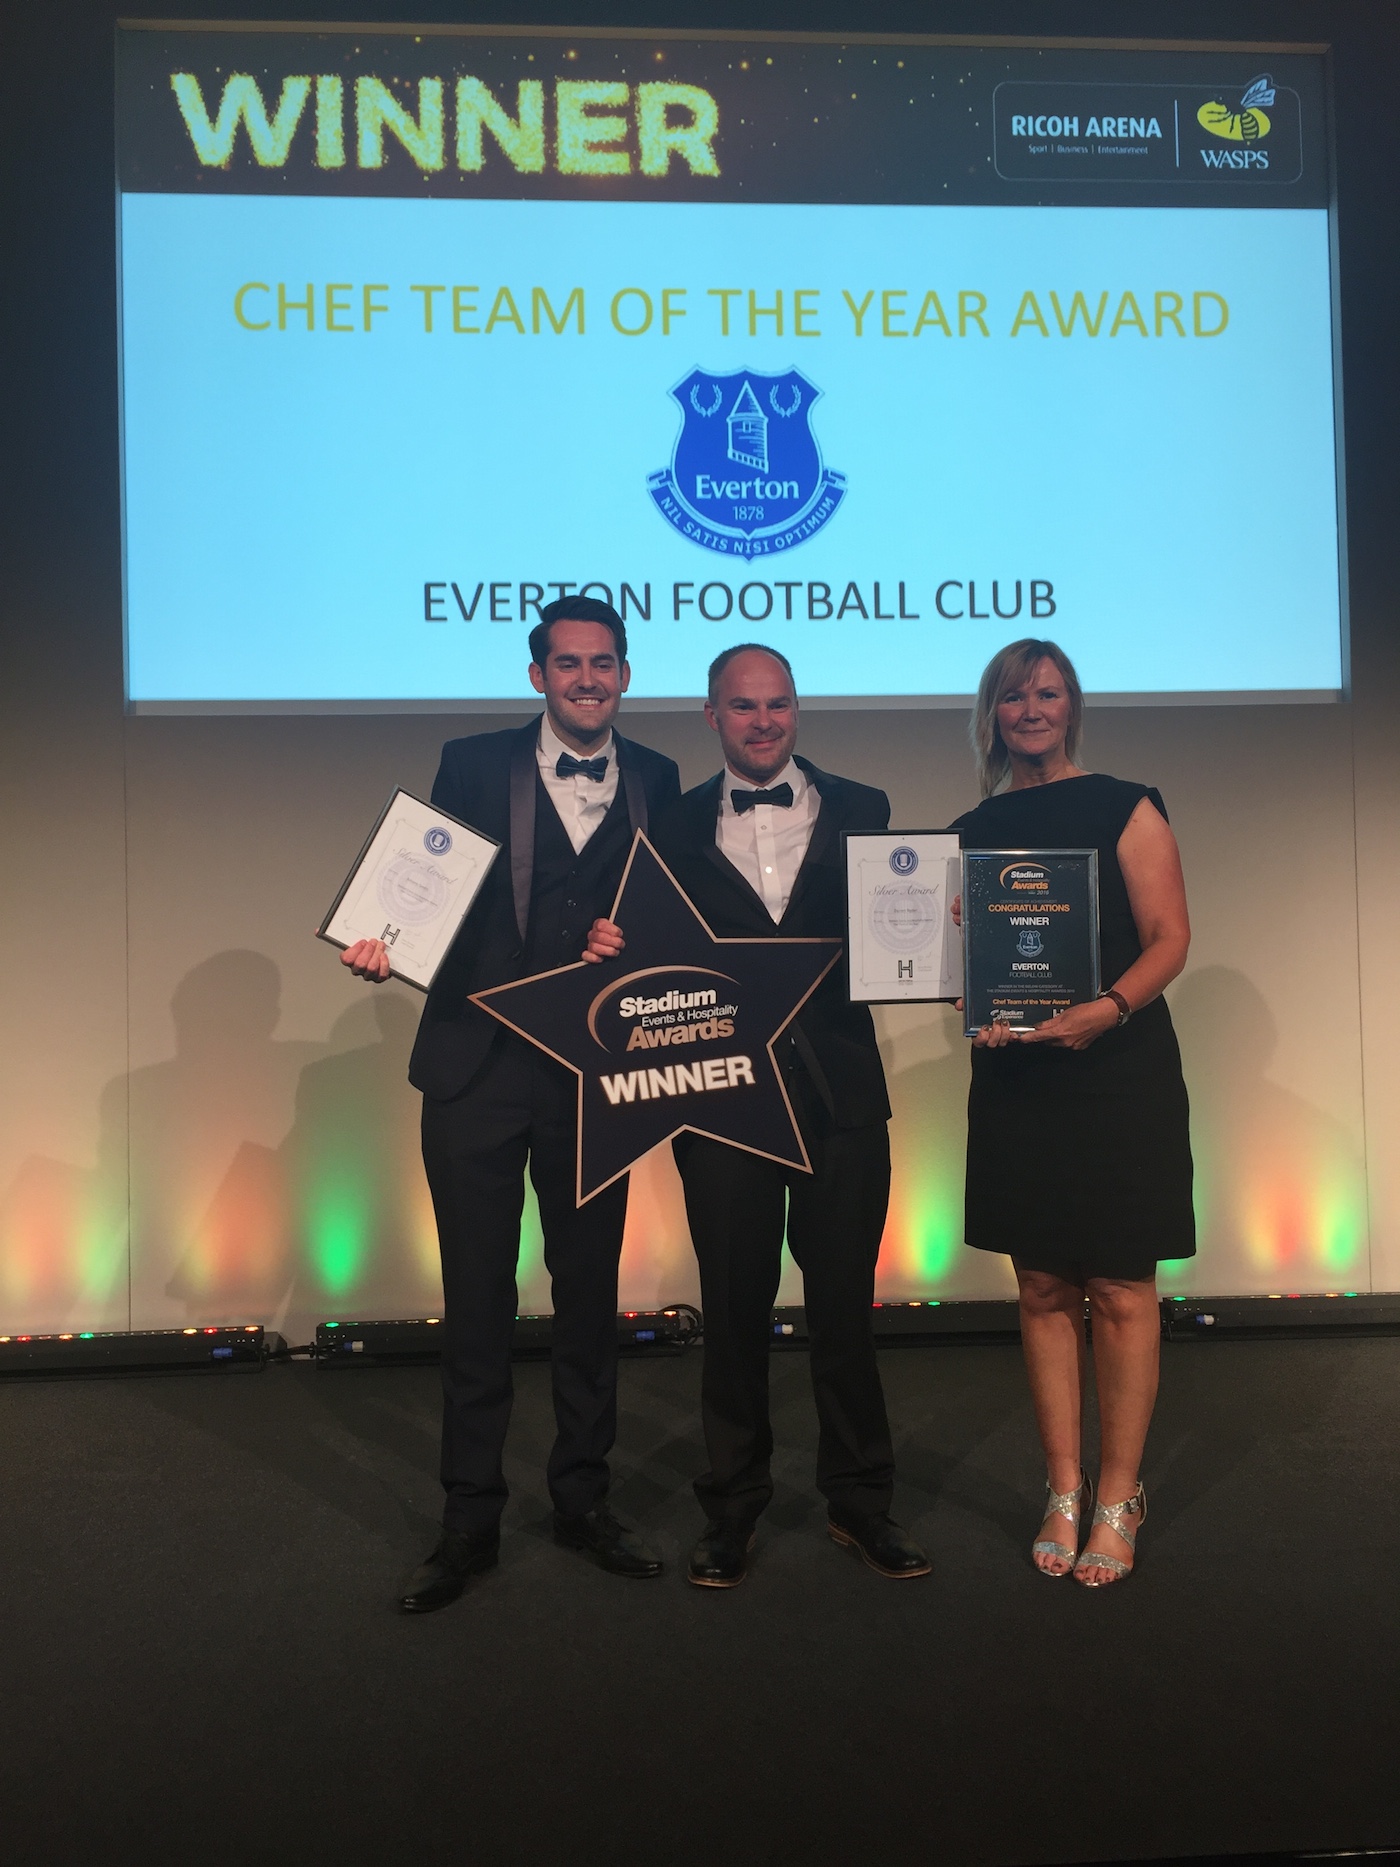 The Sodexo team at Everton receiving their Chef Team of the Year award